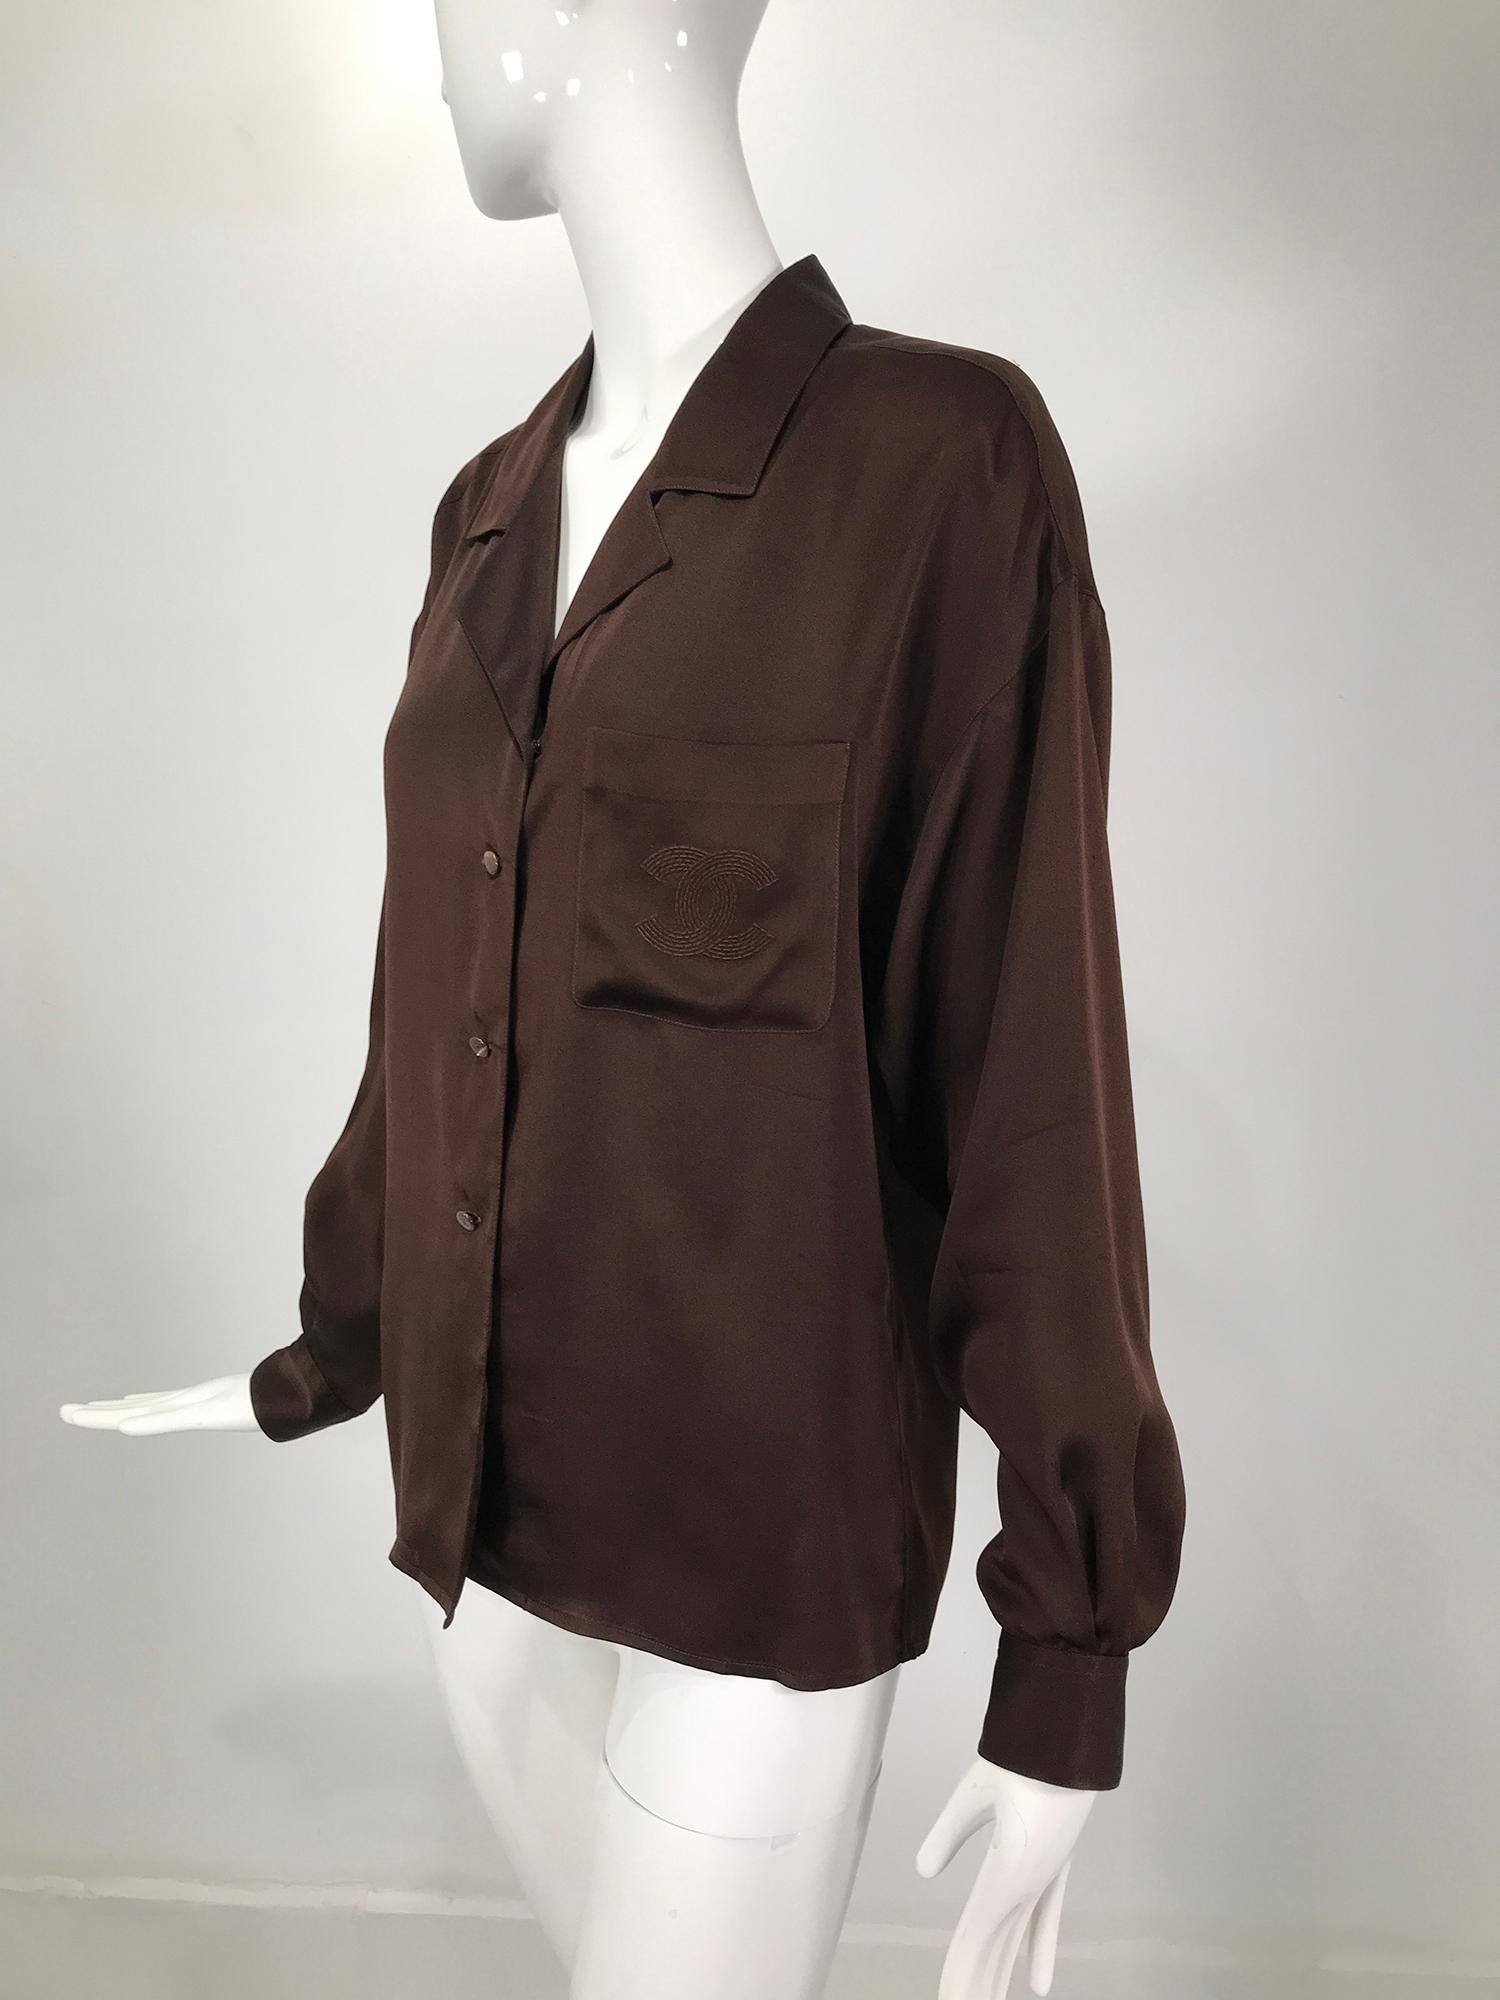 Chanel chocolate brown silk satin blouse with logo embroidered pocket. Long sleeve button front blouse with dropped shoulder yoke at front and back, wing collar, single left front breast logo embroidered pocket. The blouse closes at the front with